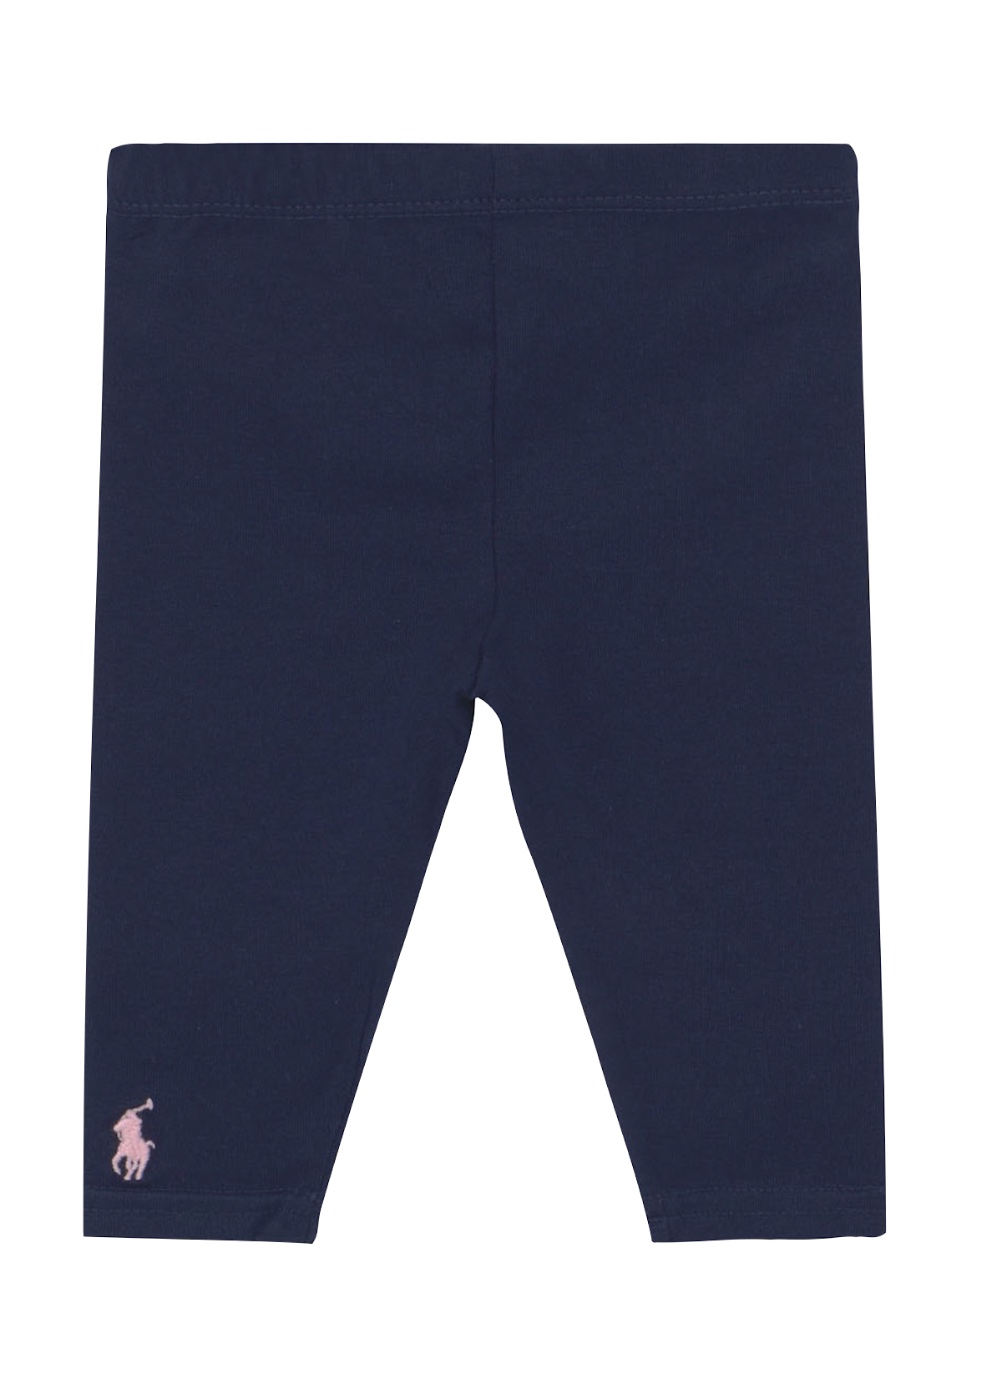 Featured image for “POLO RALPH LAUREN LEGGINGS”